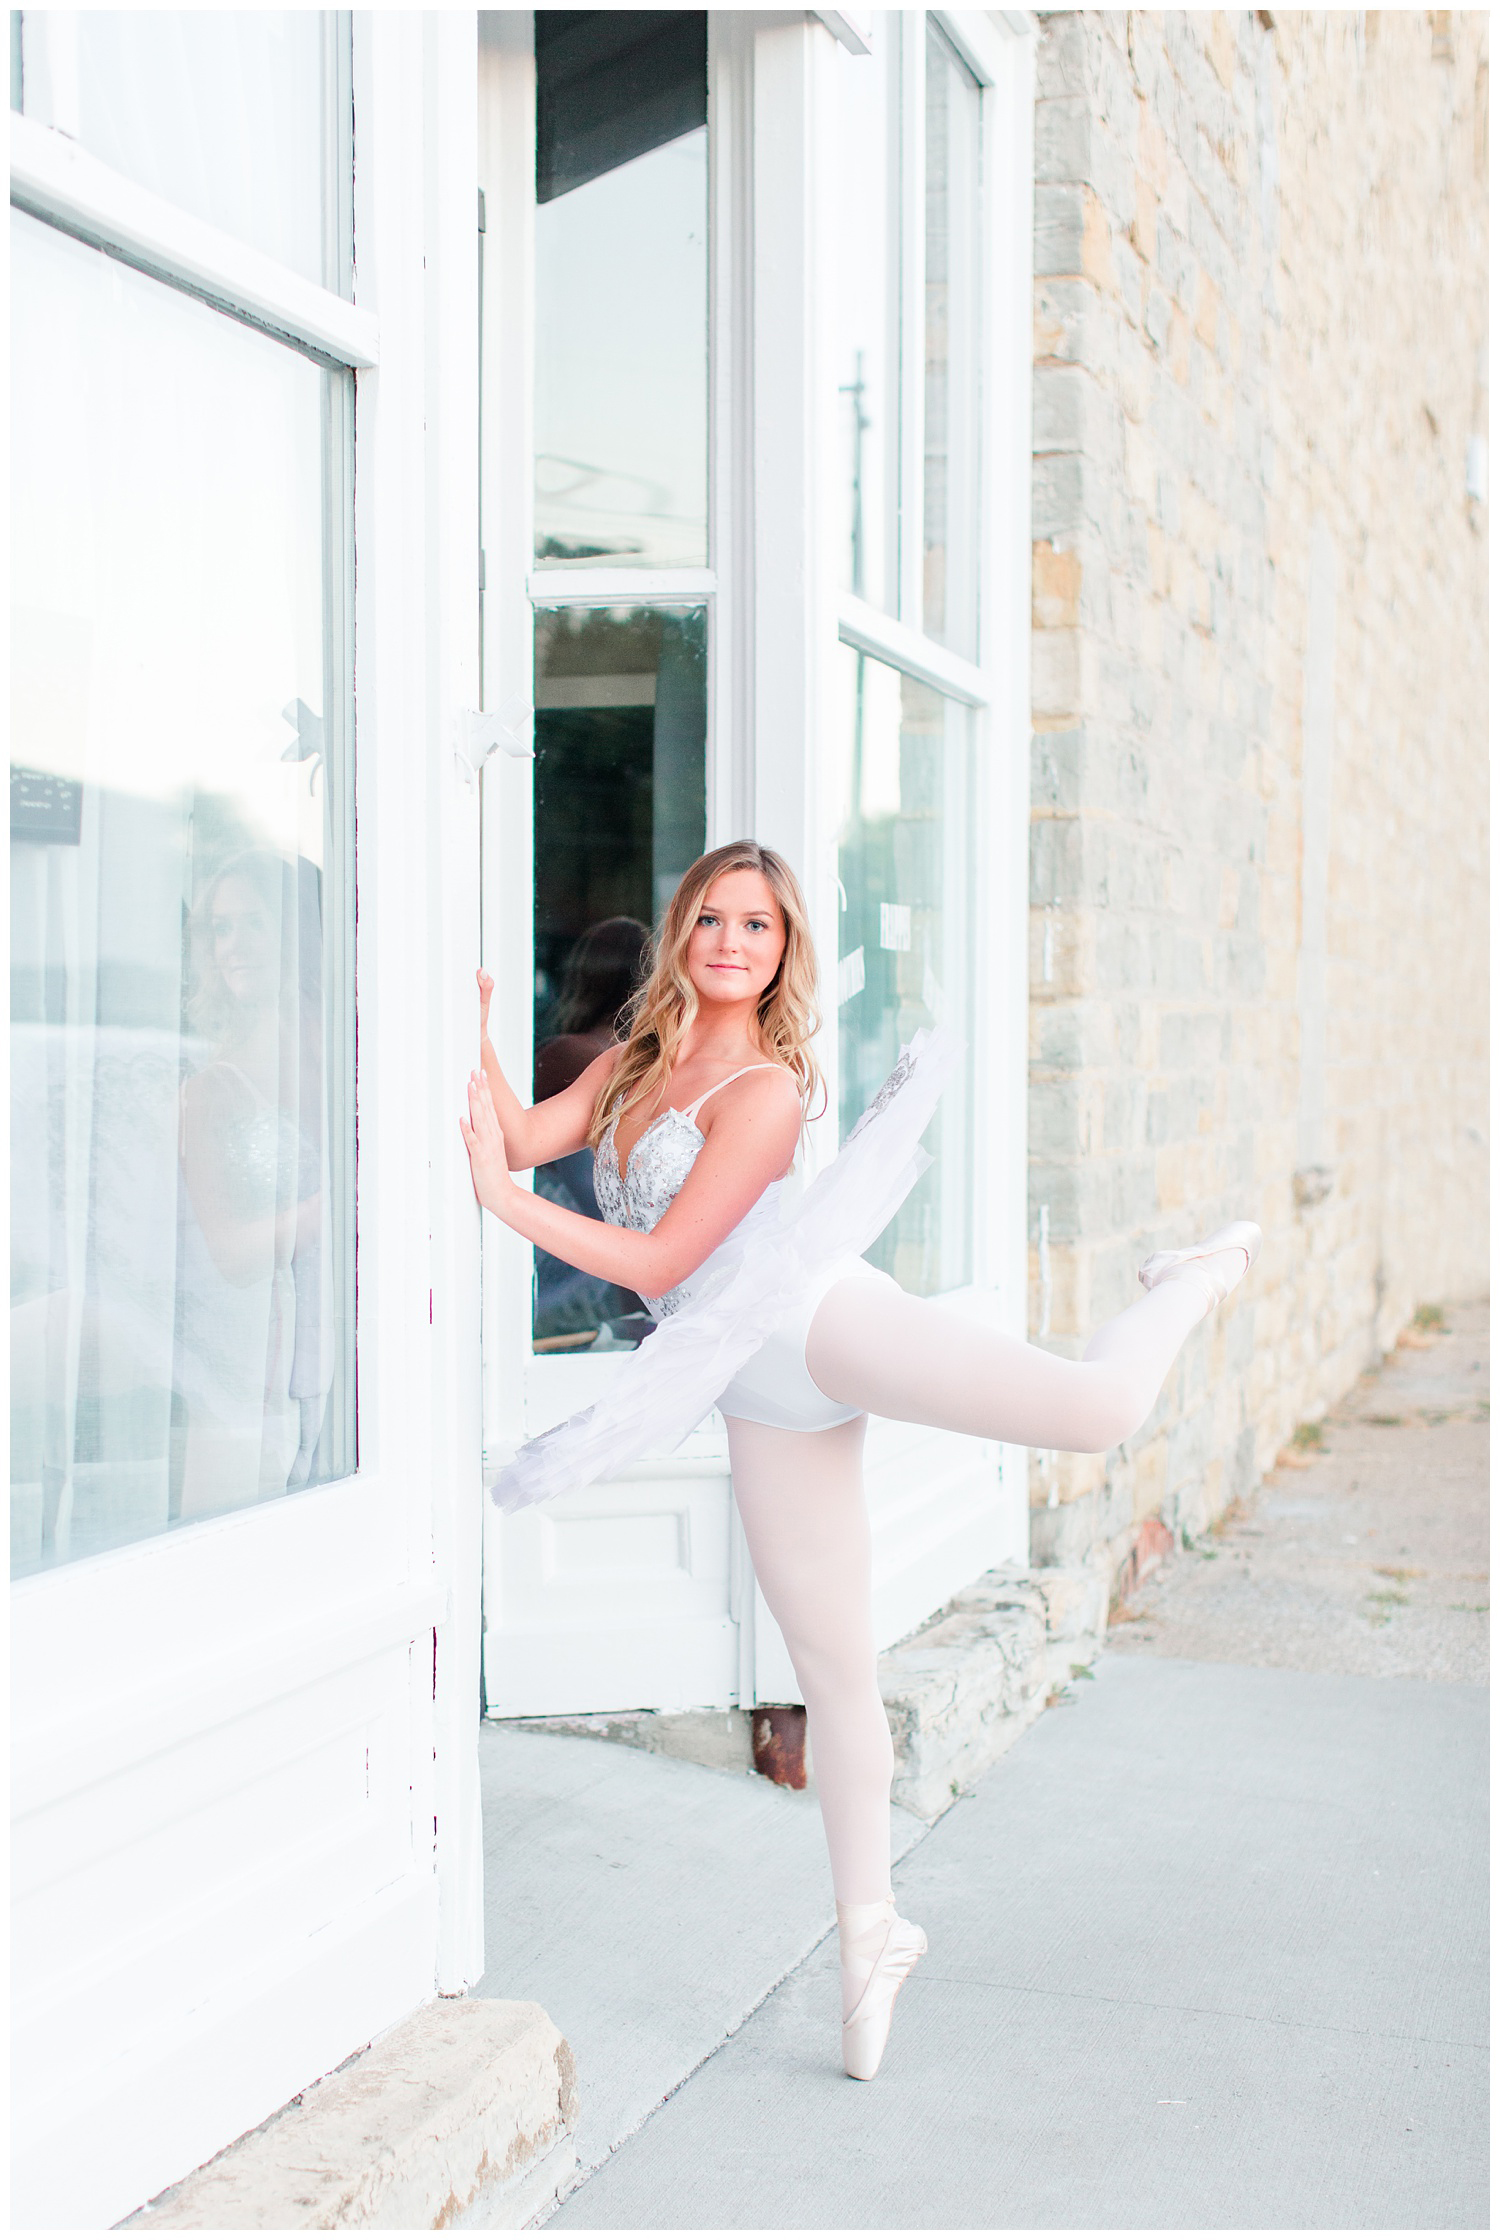 Senior dance photography girl performs a derriere attitude in full classical ballet white tutu in downtown Humboldt, Iowa | CB Studio